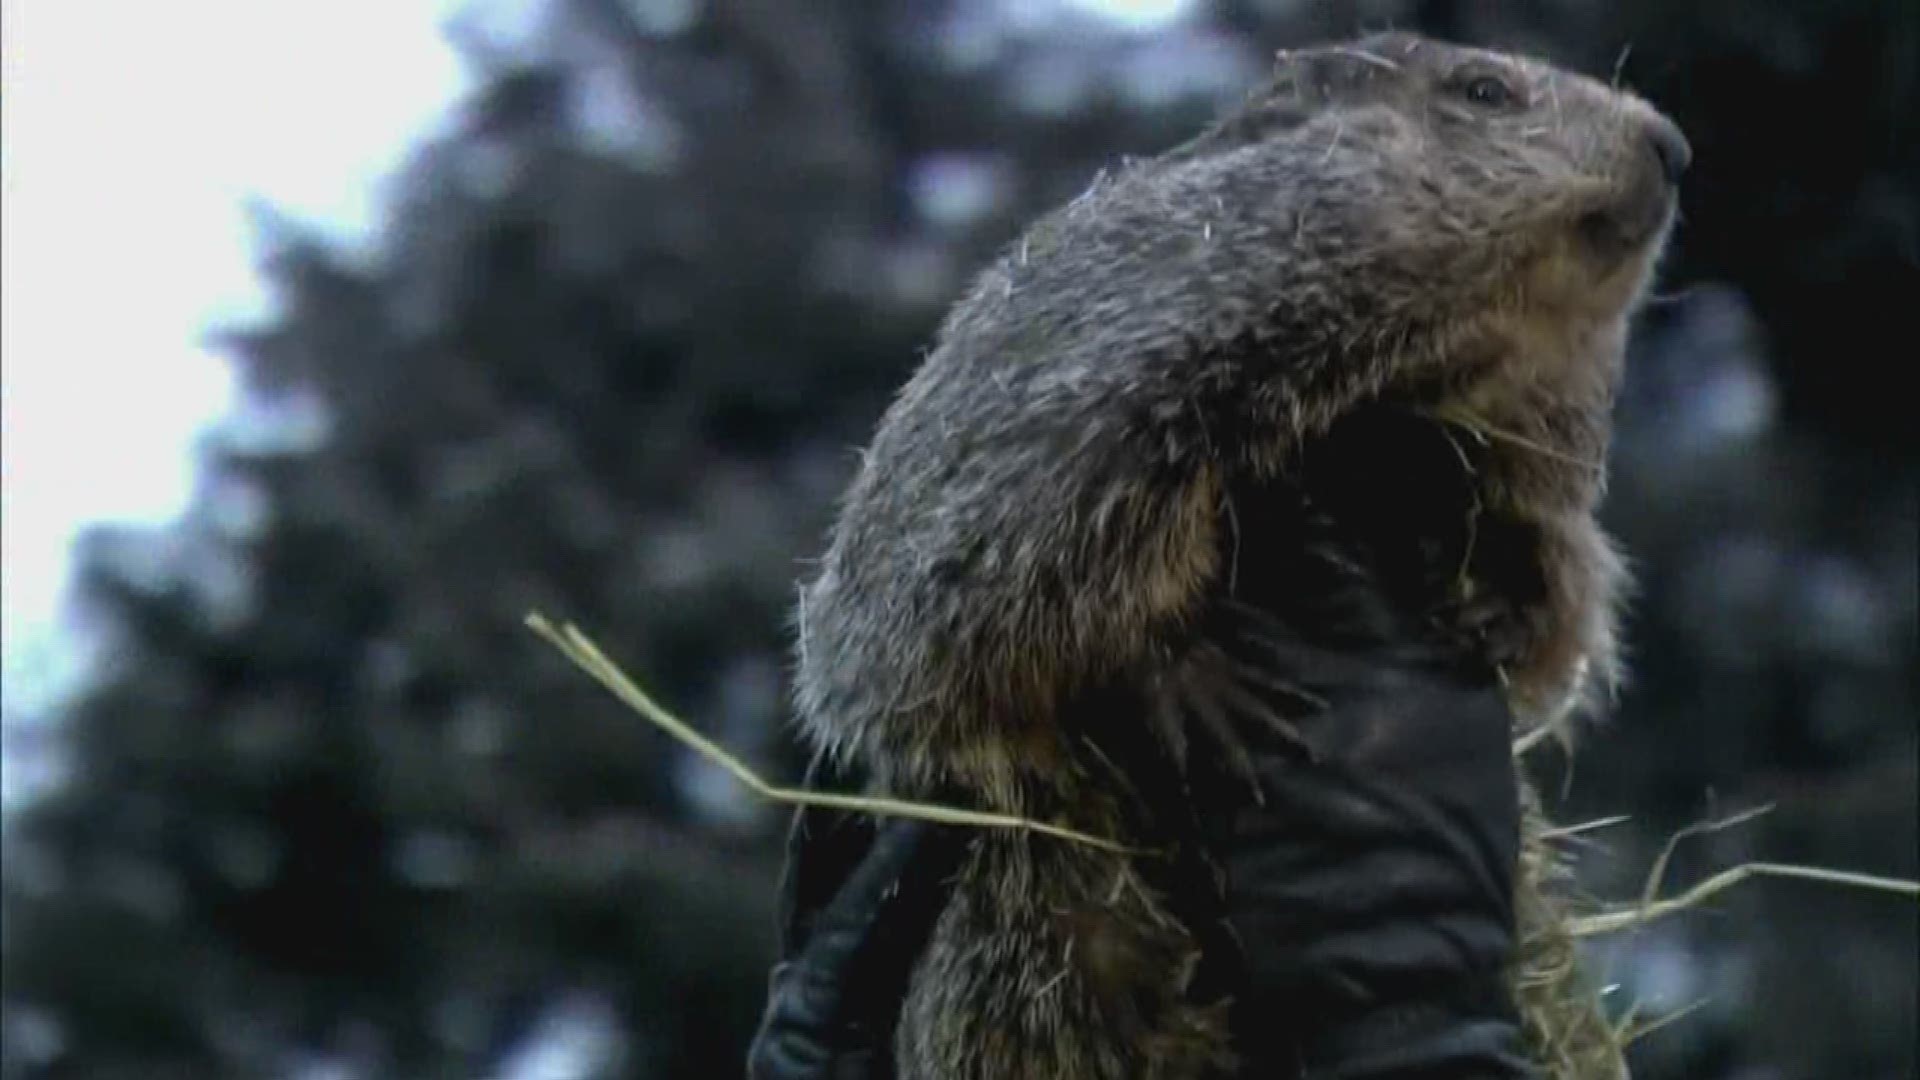 Sunday is Groundhog Day, which means its time to turn to a little rodent named Punxsutawney Phil to tell us if we will have 6 more weeks of winter.